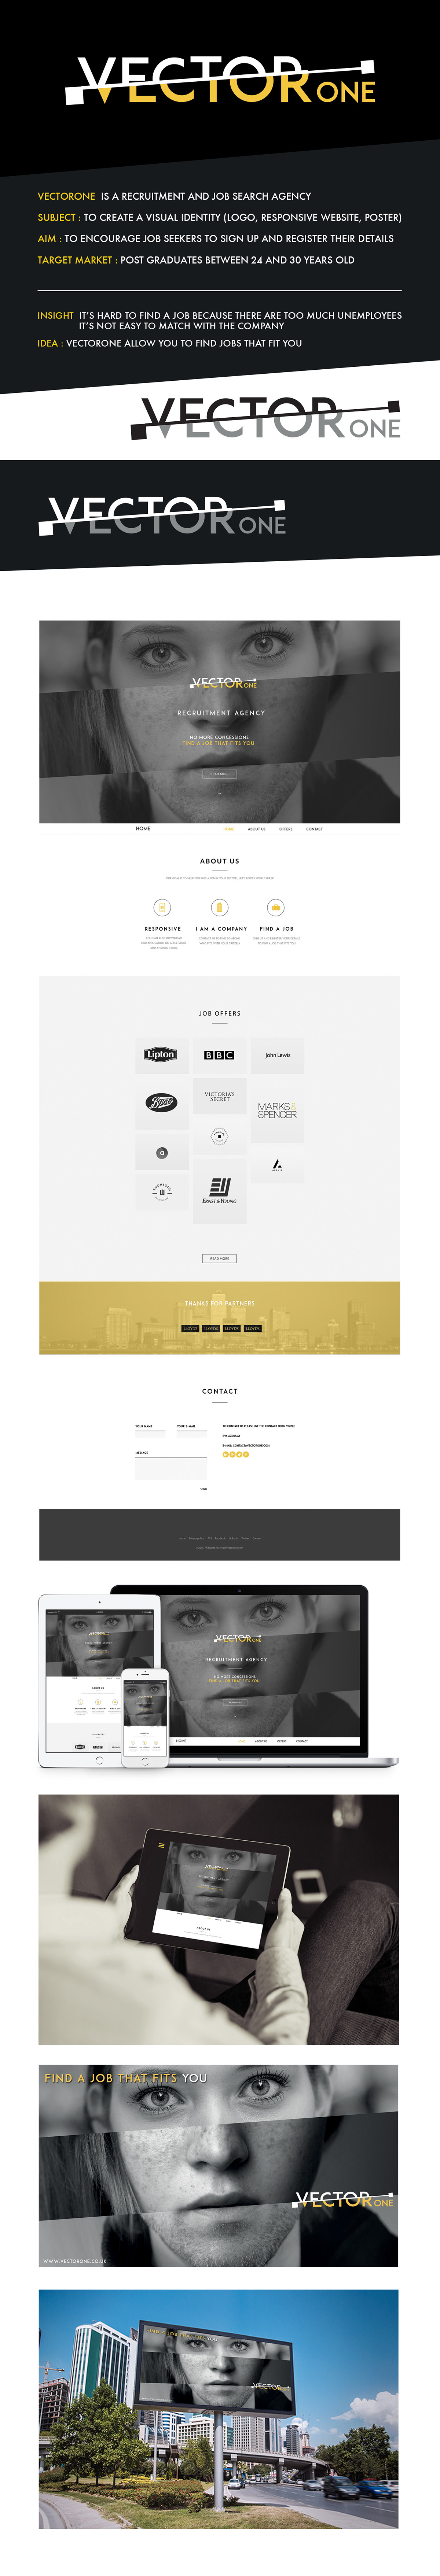 student project yellow black vector one job FIT match recrutment apply corporate